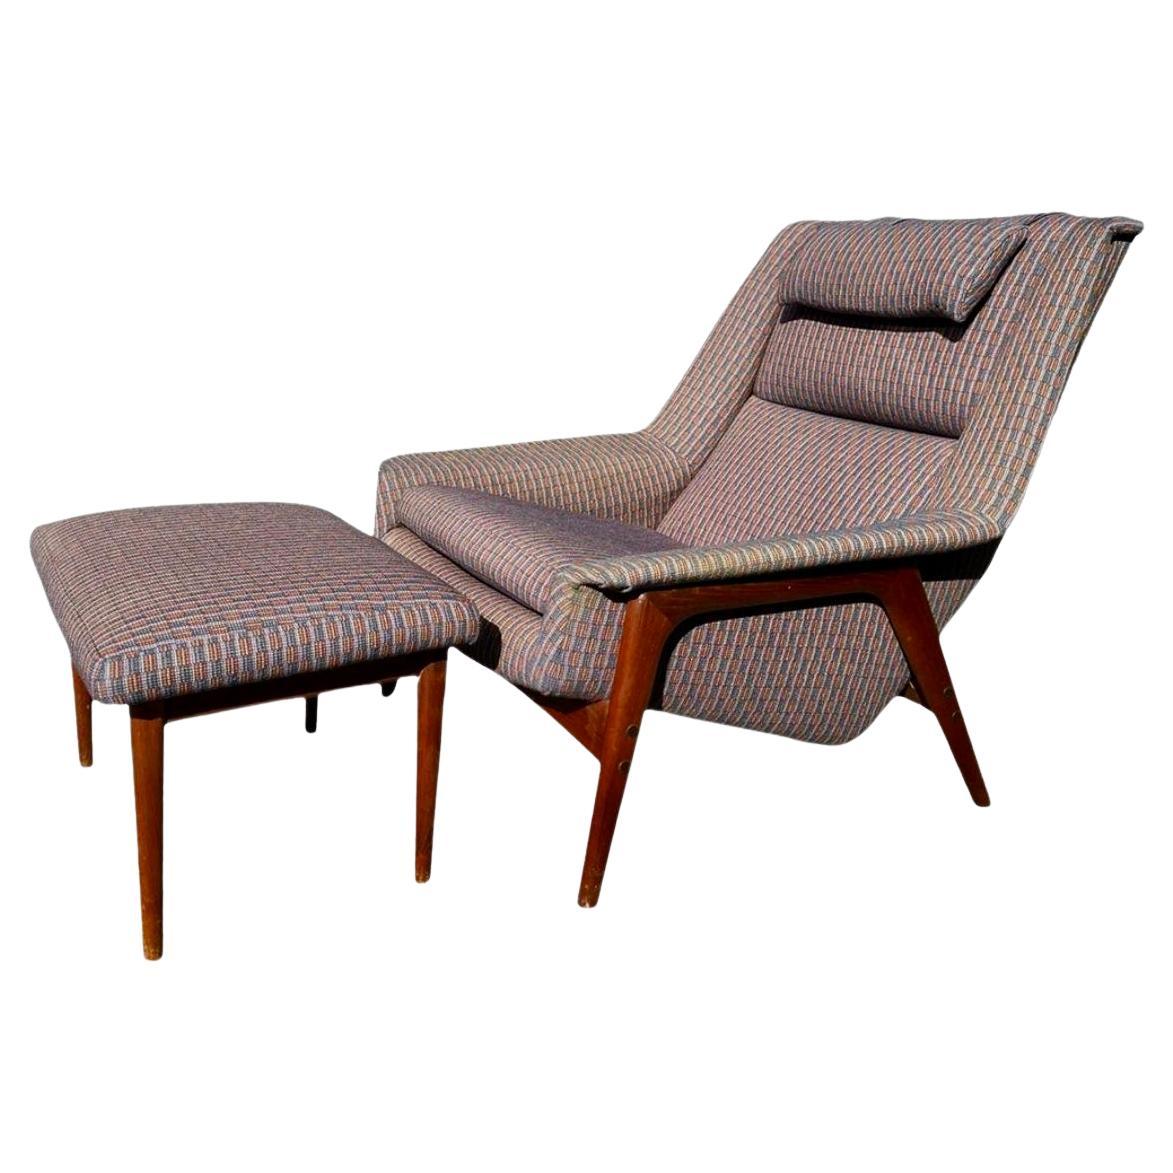 Folke Ohlsson For Dux ‘Profil’ Lounge Chair and Ottoman